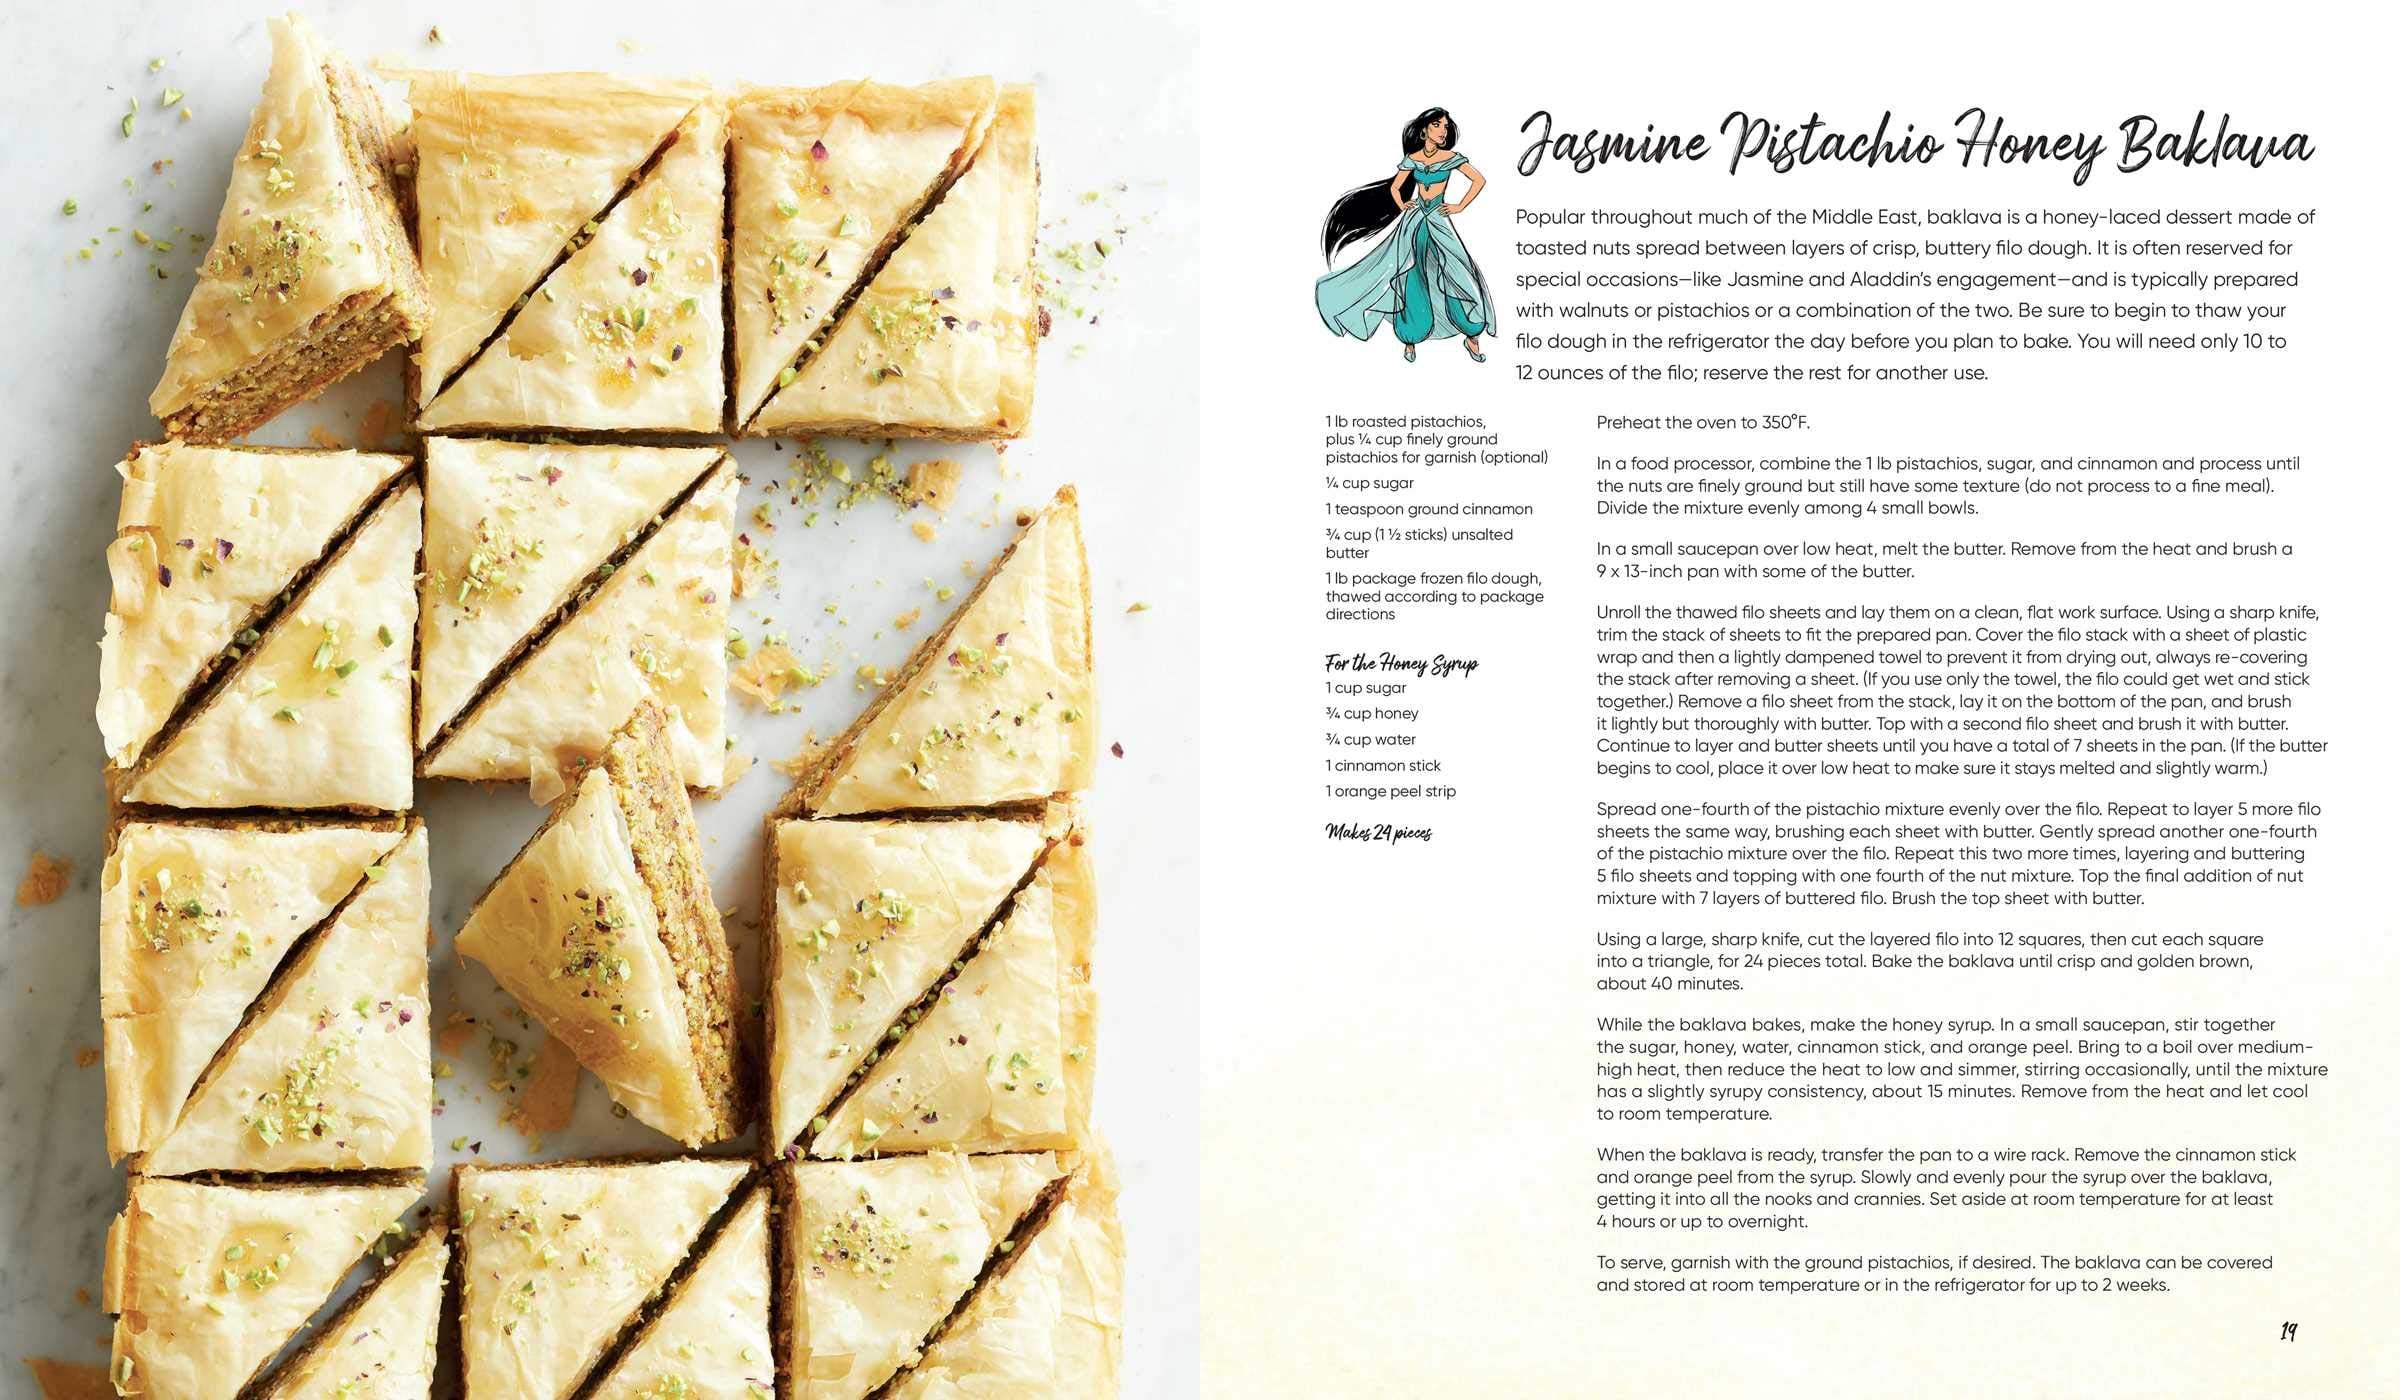 Cookbook Review: Disney Princess Baking is Good for Experience